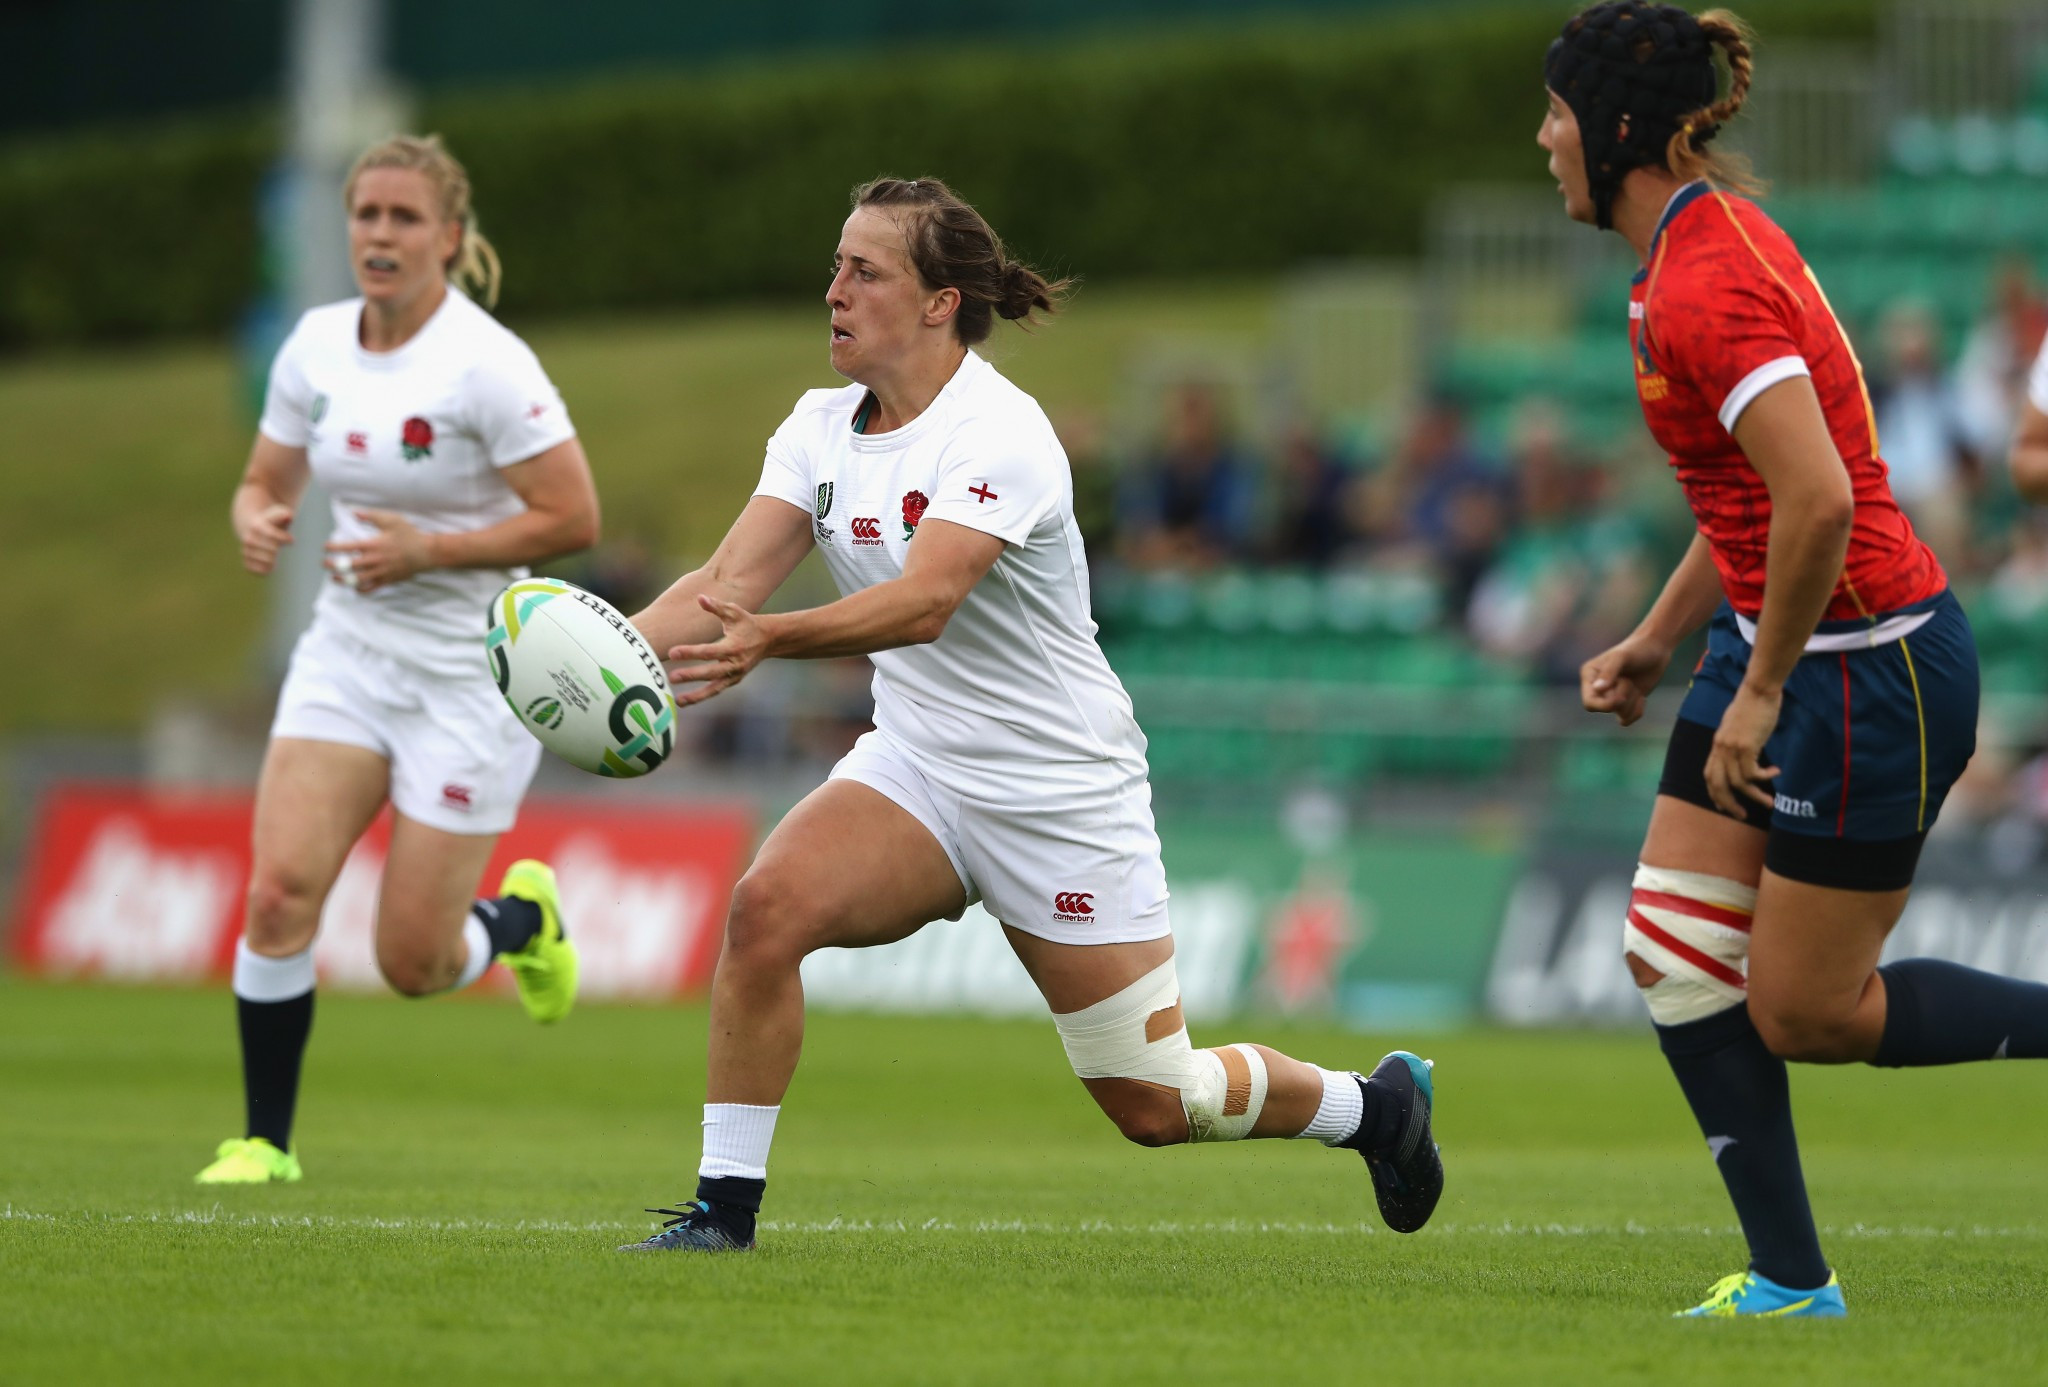 Holders England thrash Spain to begin defence of Women's Rugby World Cup